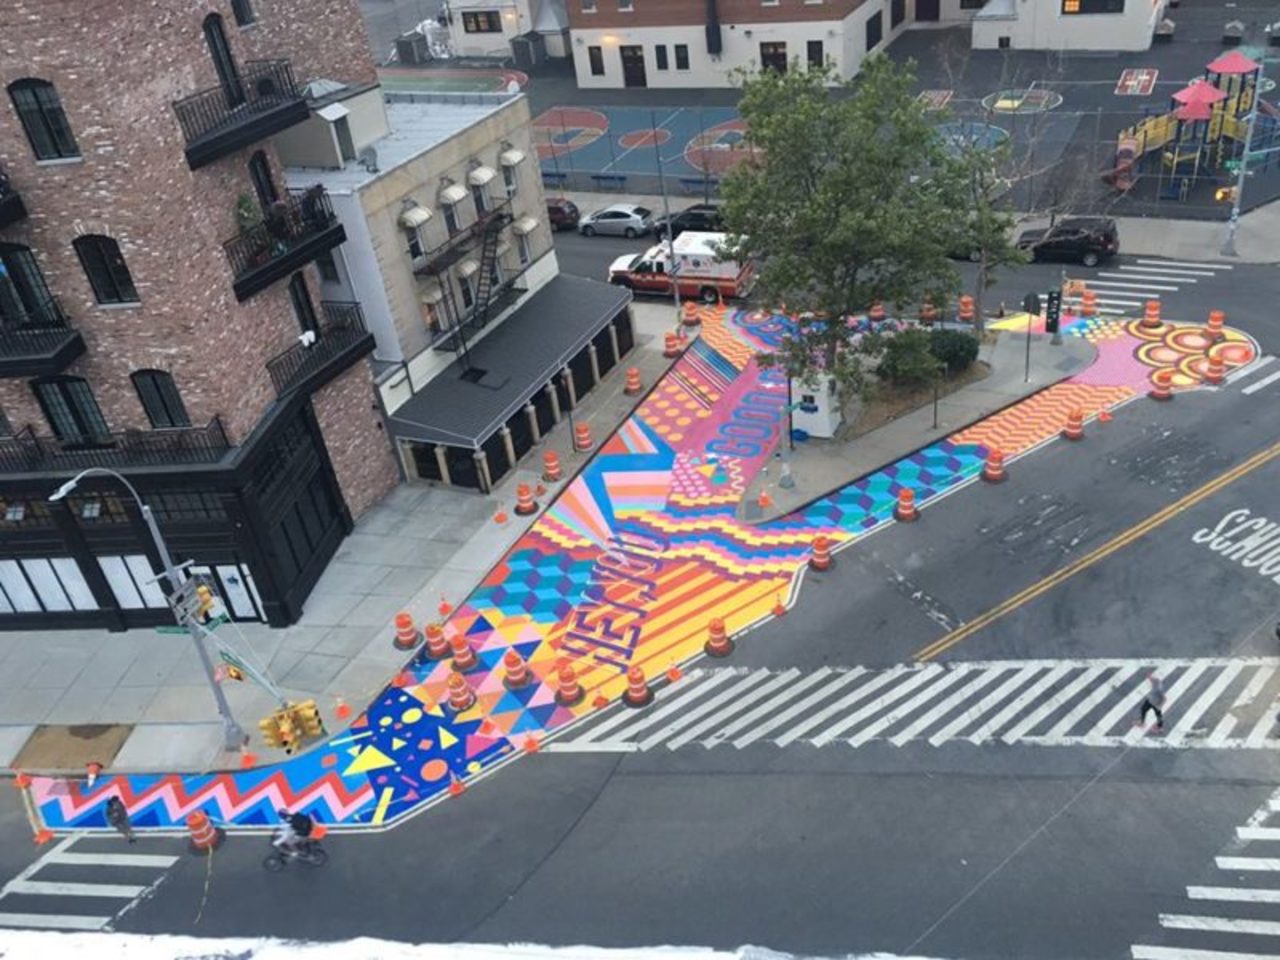 THIS is #streetart! Amazing asphalt activation by Queen Andrea celebrates NYC diversity. http://untappedcities.com/2016/06/29/nyc-mural-by-graffiti-artist-unveiled-at-ascenzi-square-in-williamsburg/ https://t.co/t9rOmTqSNF